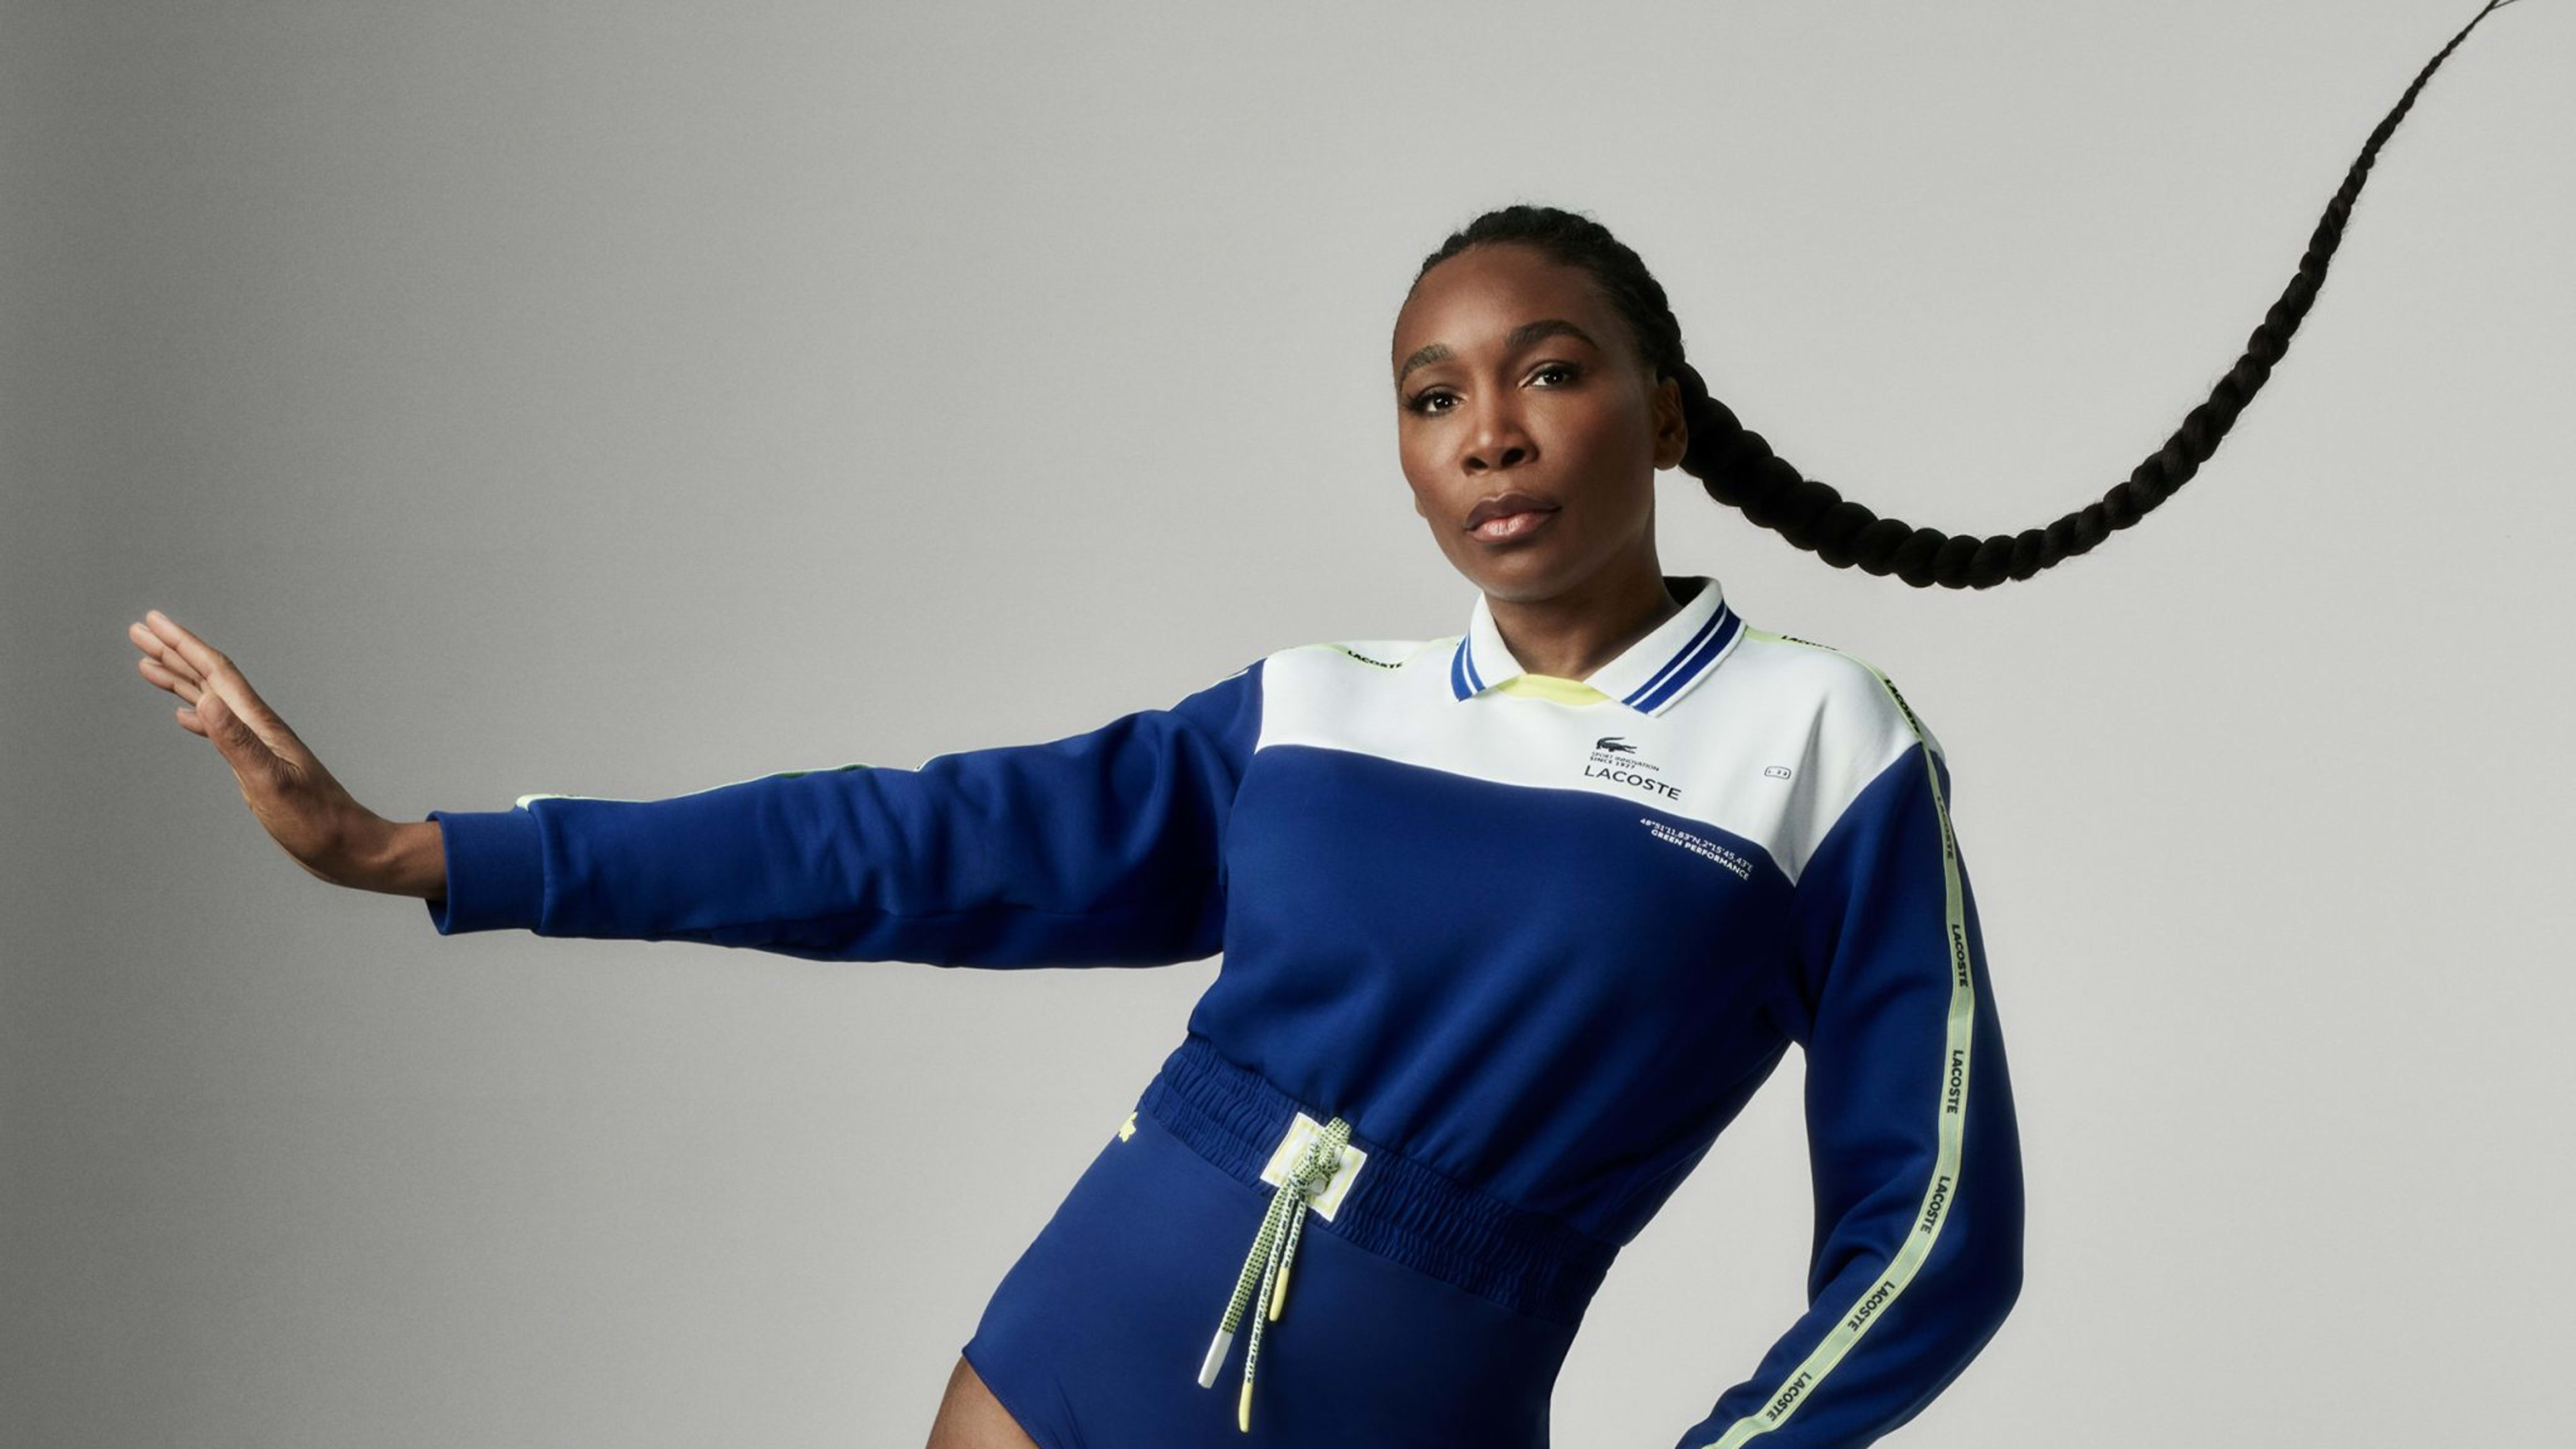 Points: Lacoste taps into roots with Williams as global ambassador